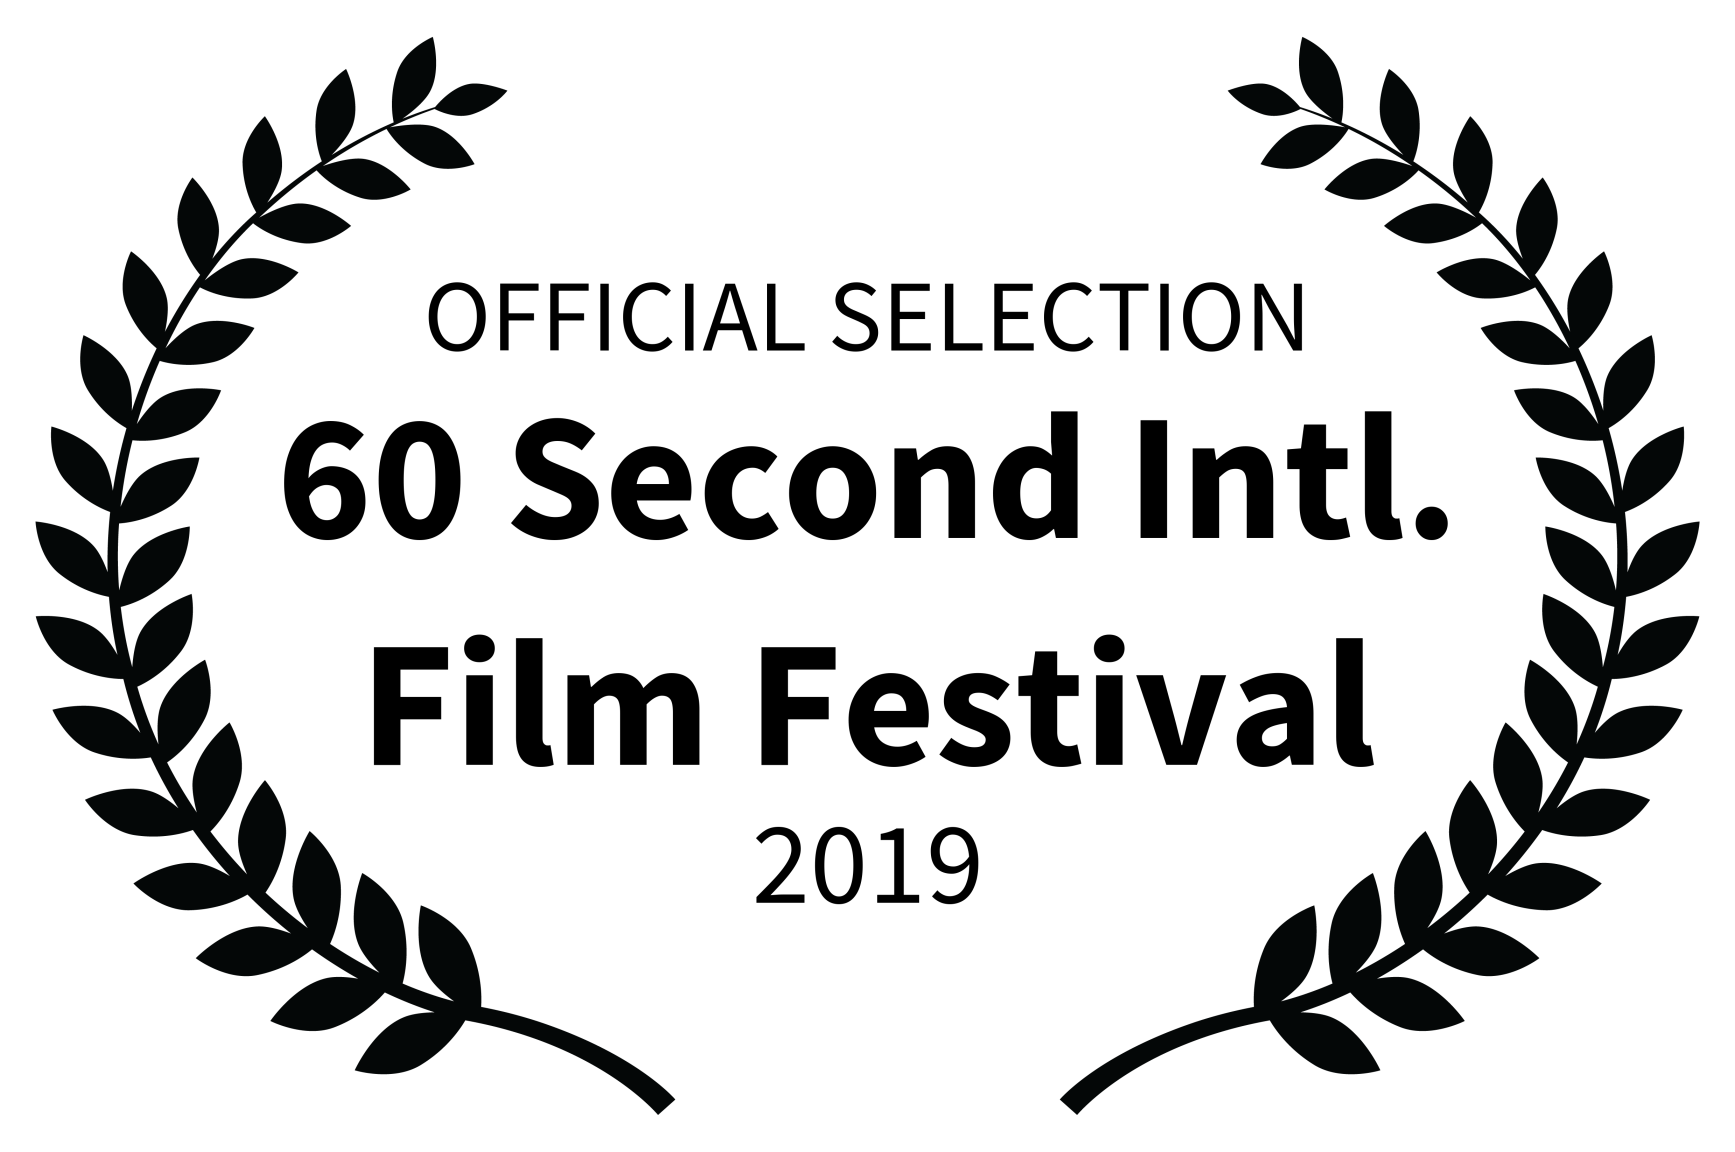 OFFICIAL SELECTION - 60 Second Intl. Film Festival - 2019